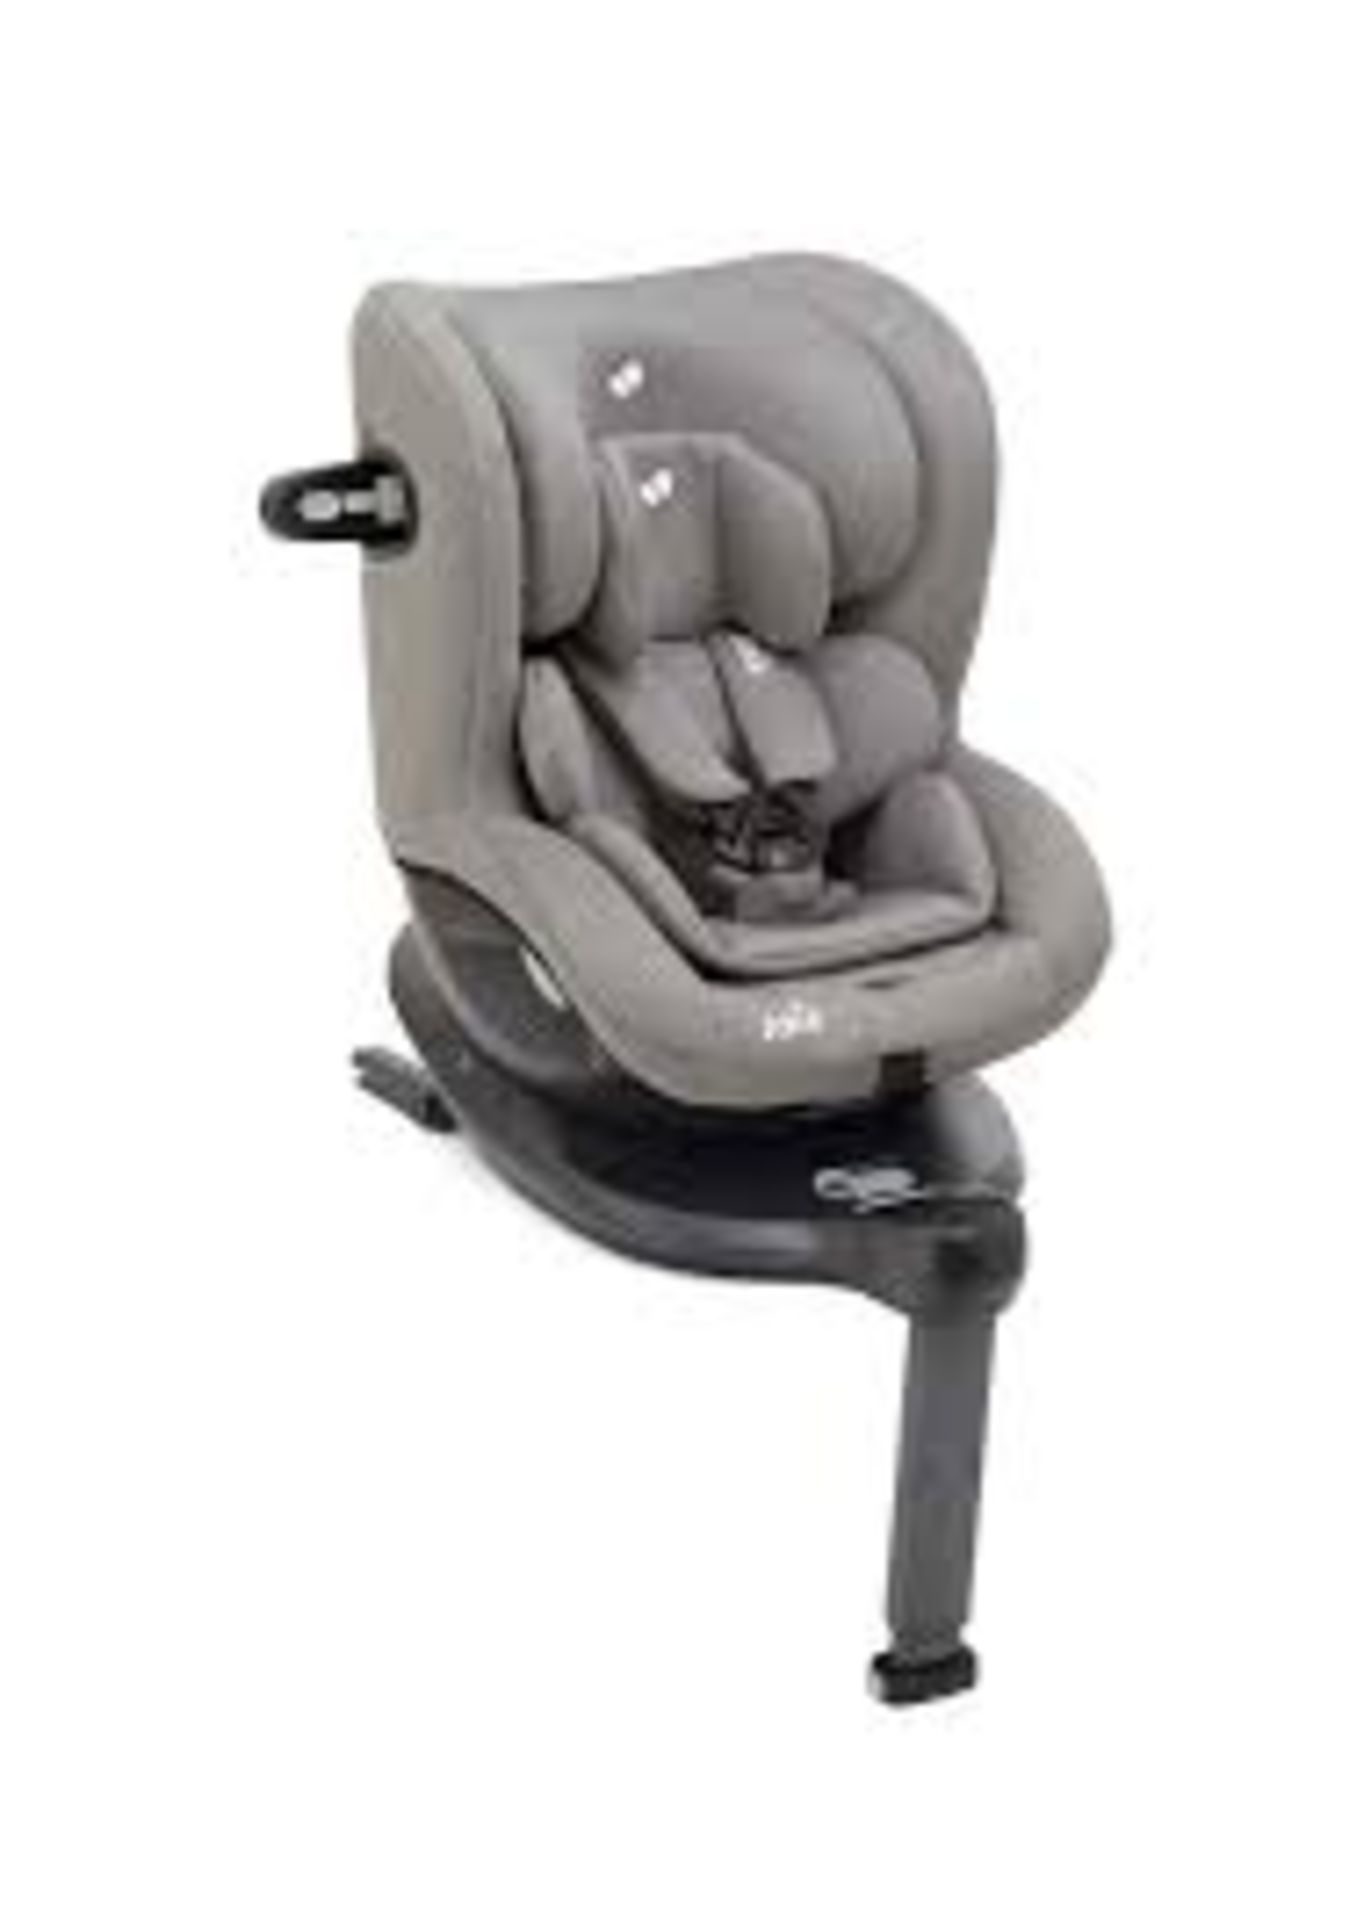 Boxed Joie Grey 360 Spin In Car Kids Safety Seat R